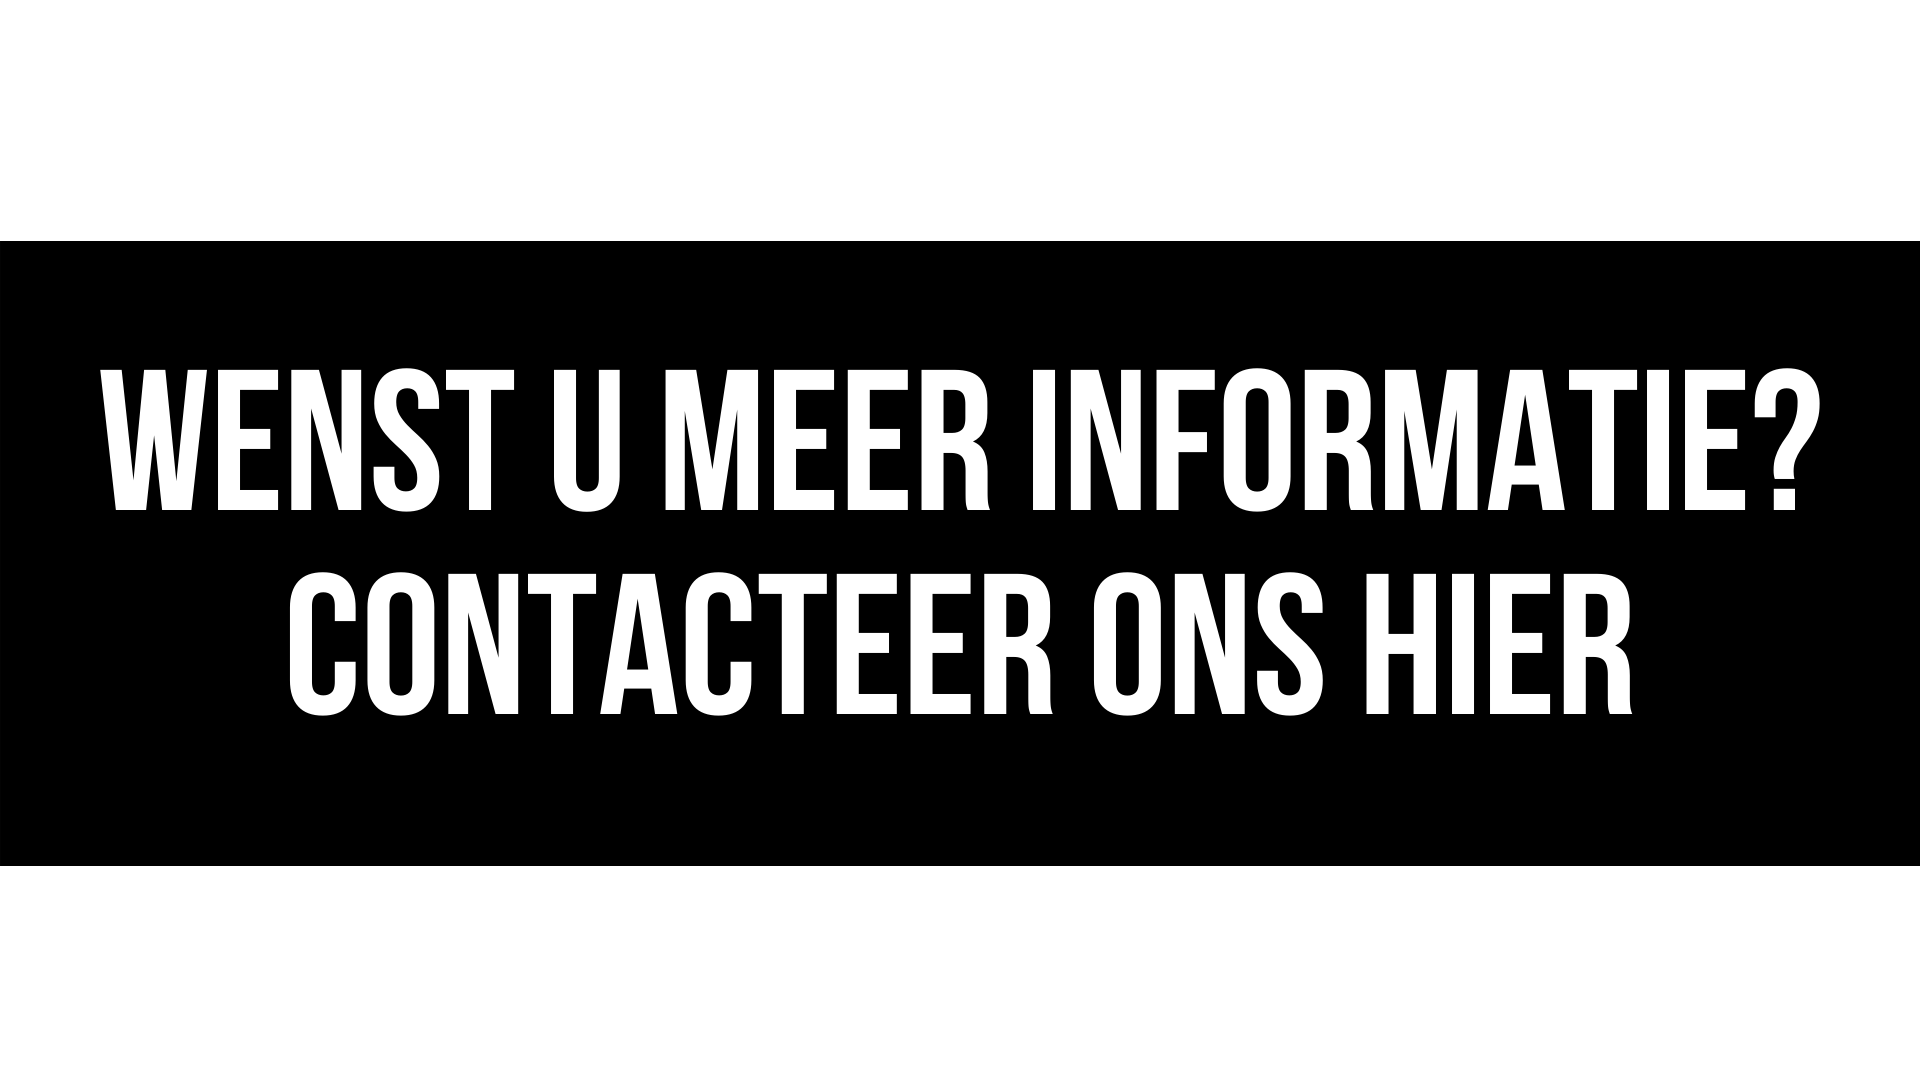 Contact ons hier